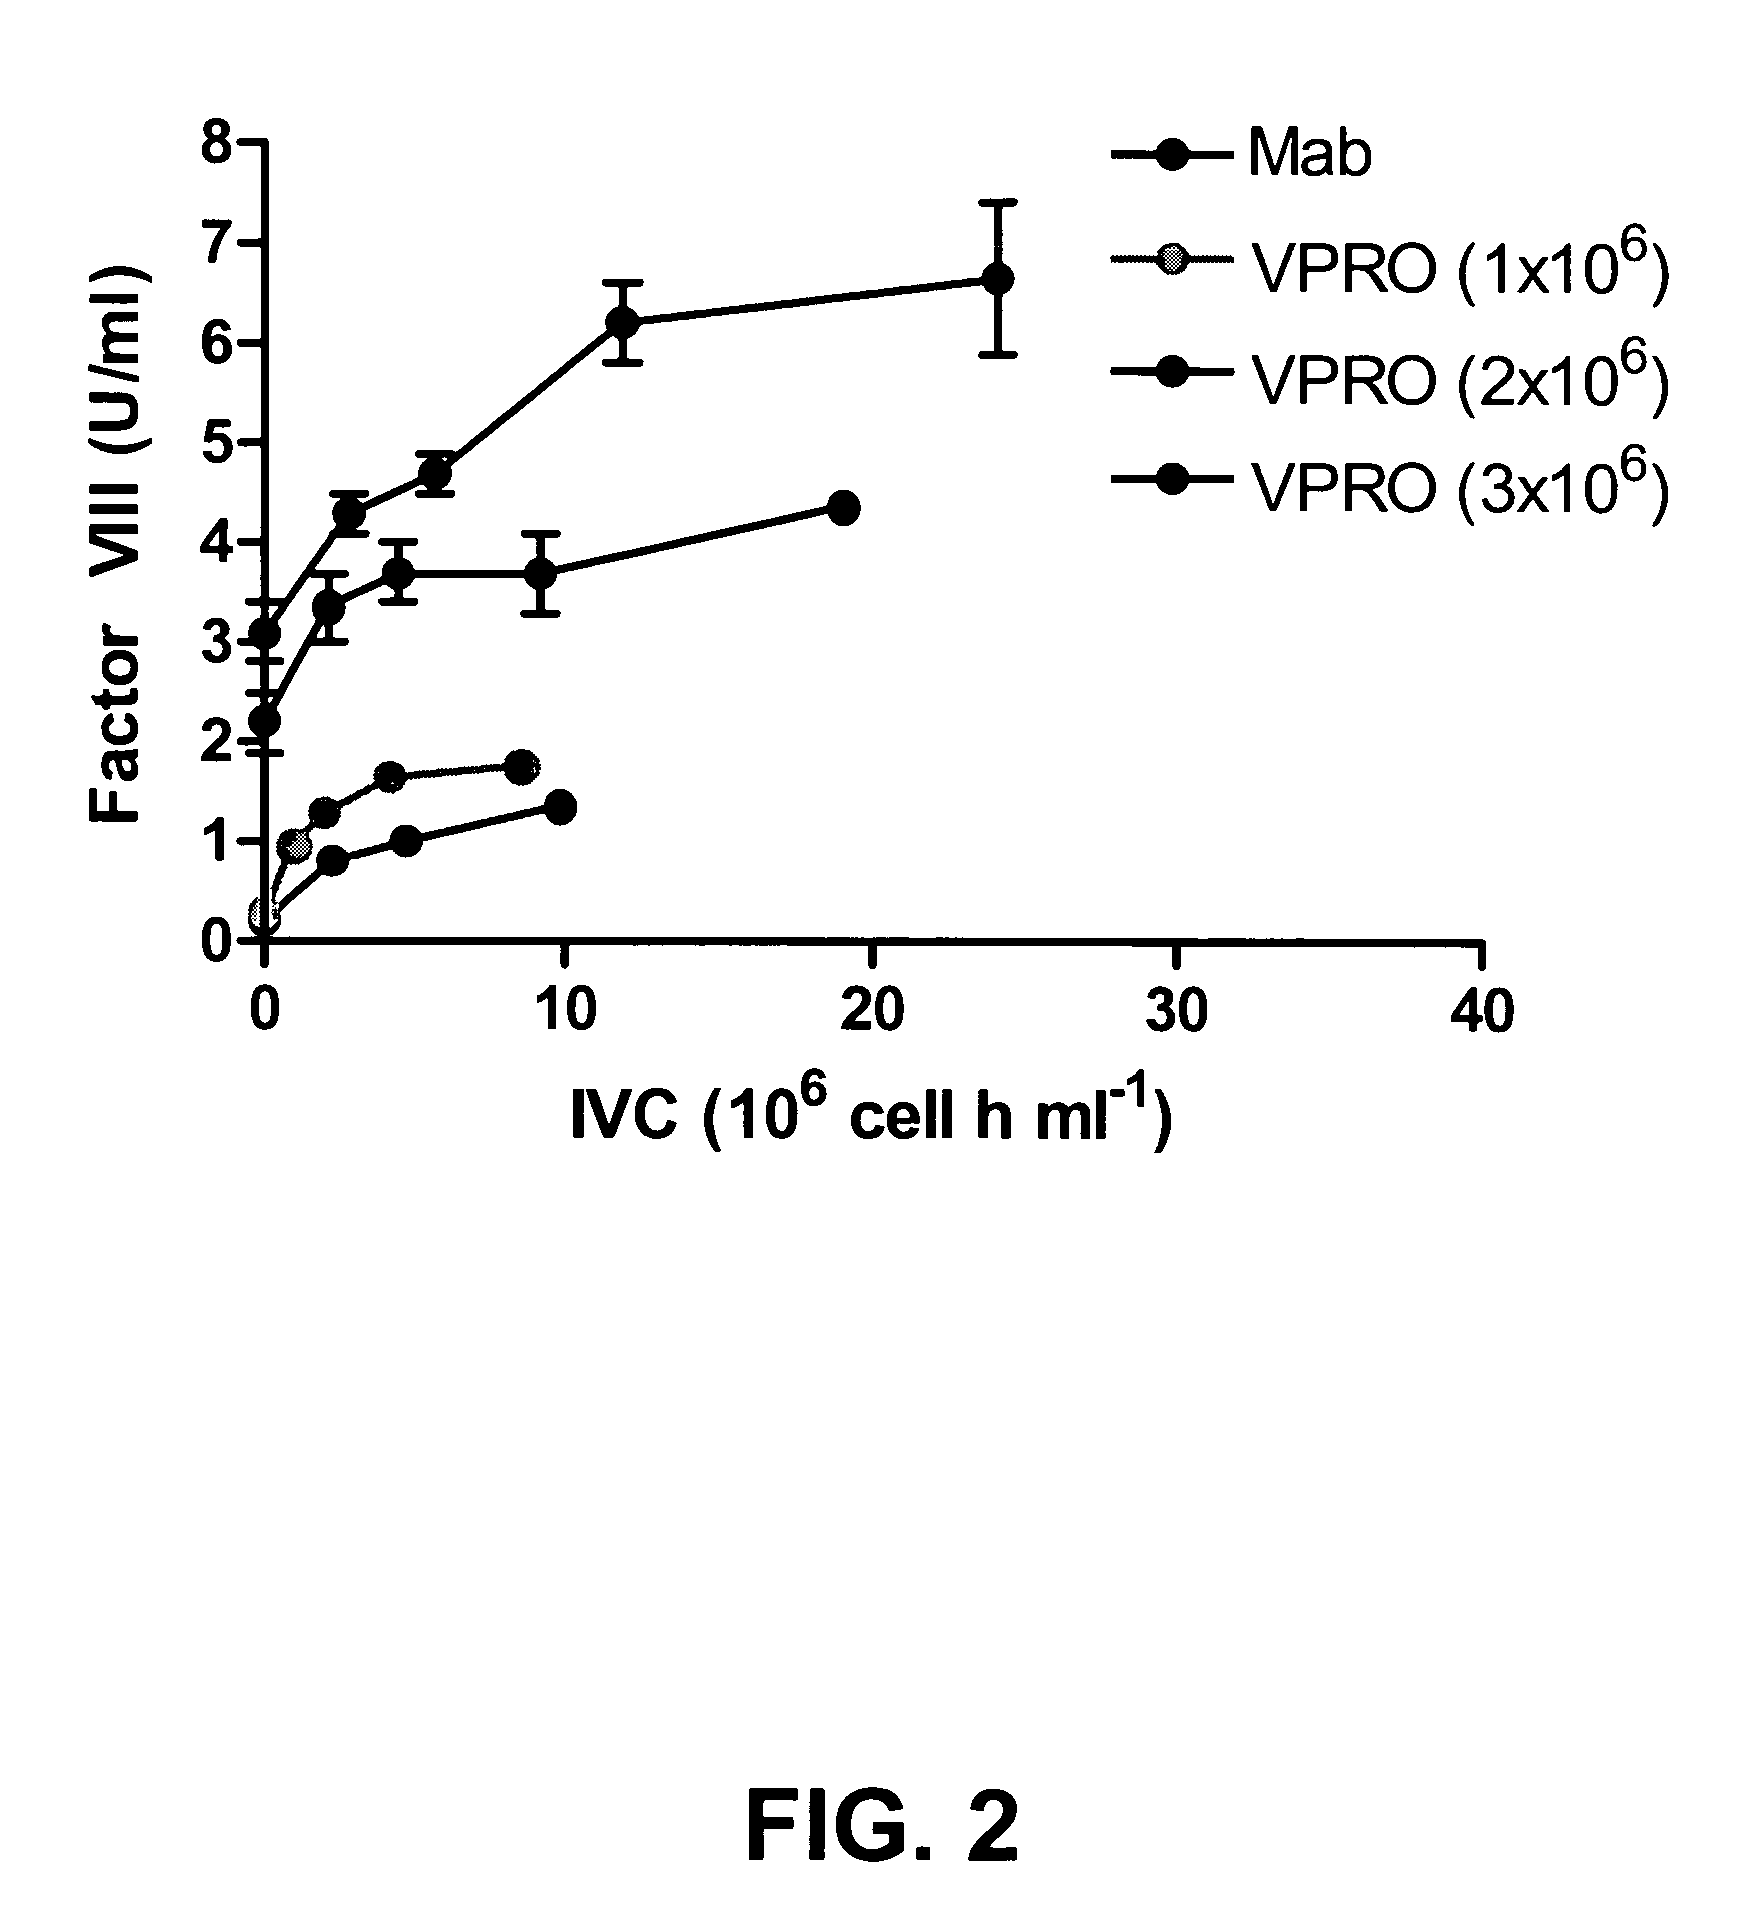 Recombinant expression of factor VIII in human cells